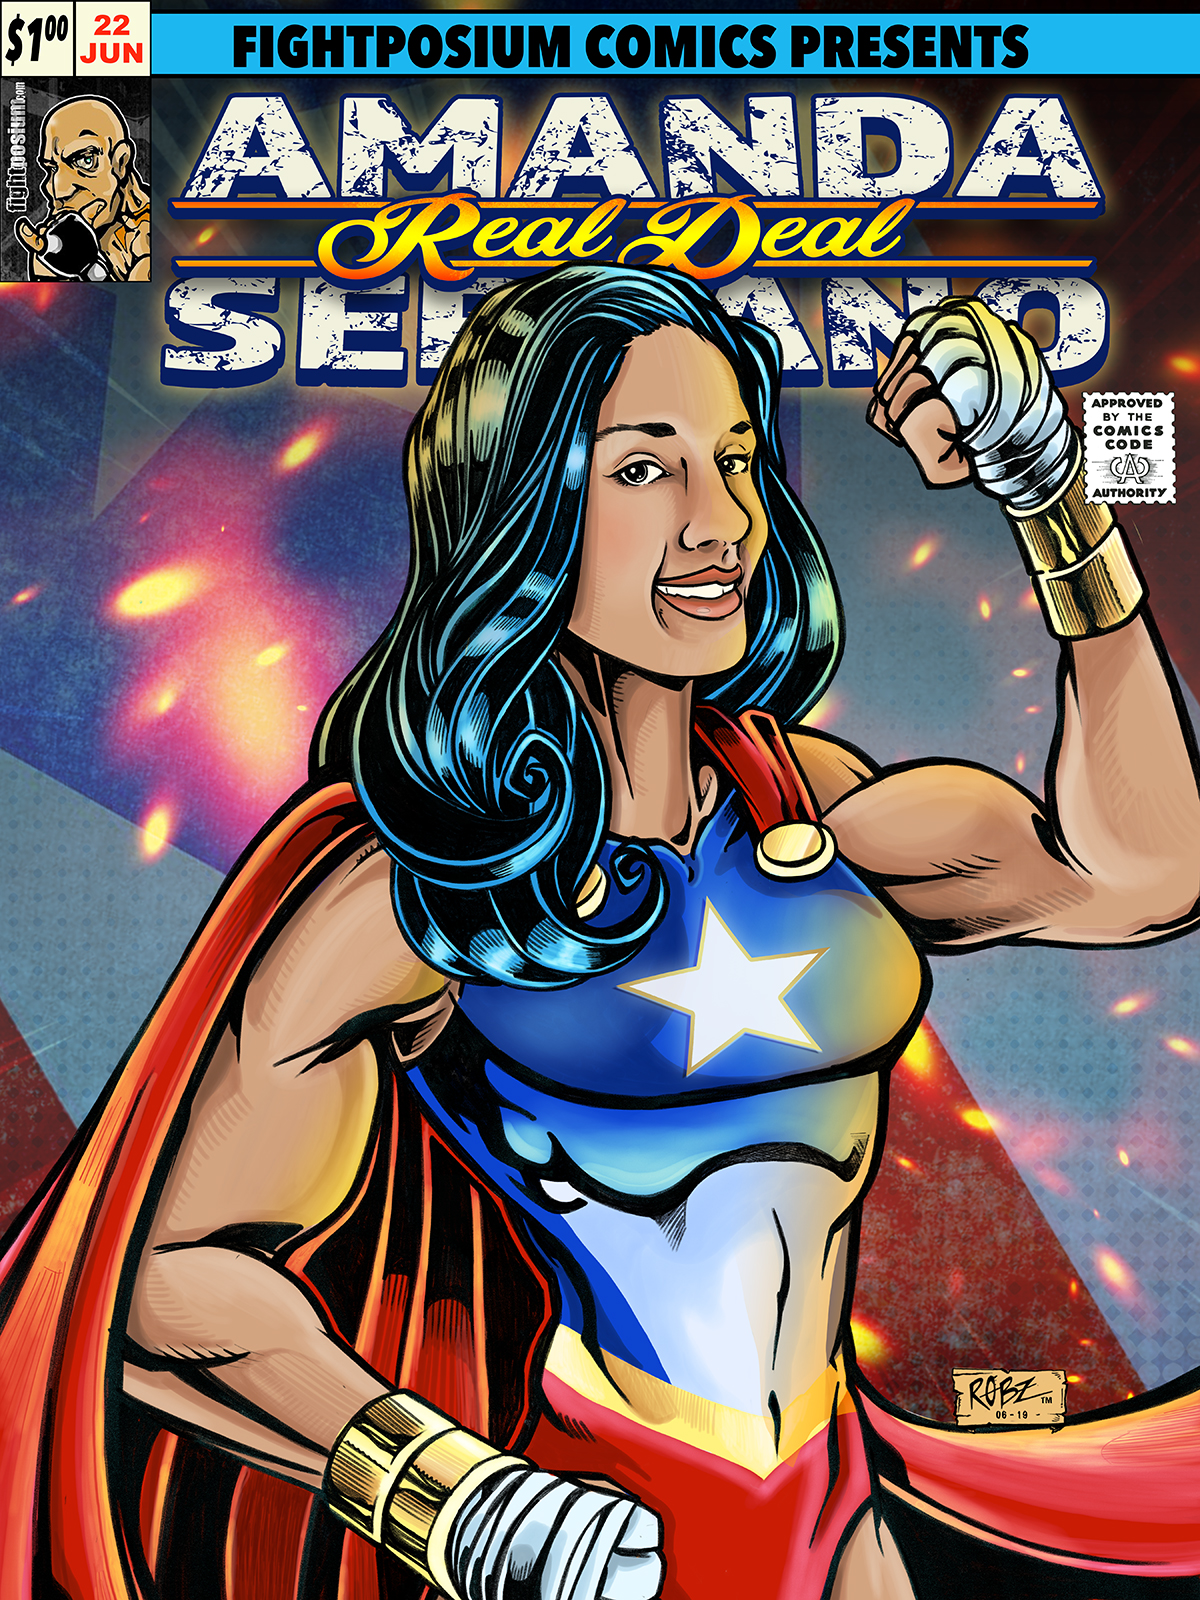 You are currently viewing Amanda “The Real Deal” Serrano Superwoman